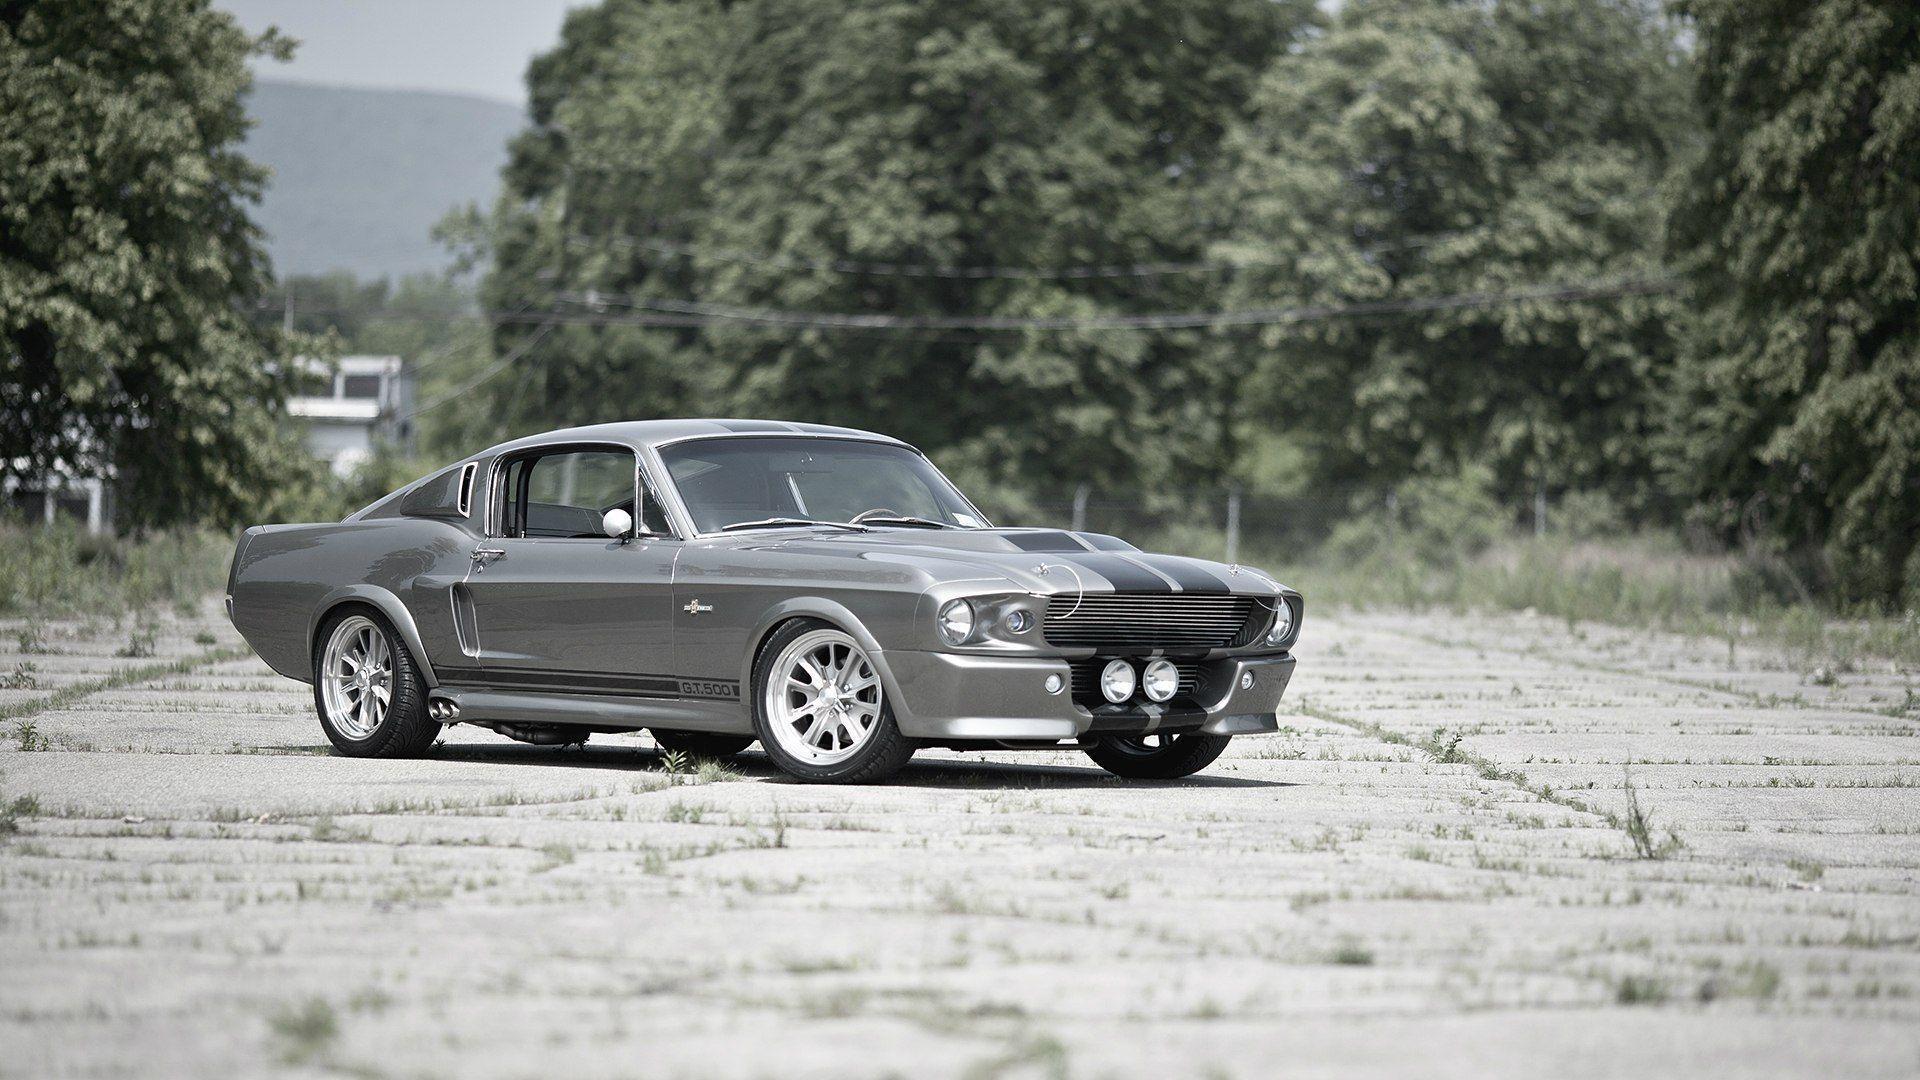 Vehicles For > Ford Mustang 1967 Shelby Gt500 Wallpaper